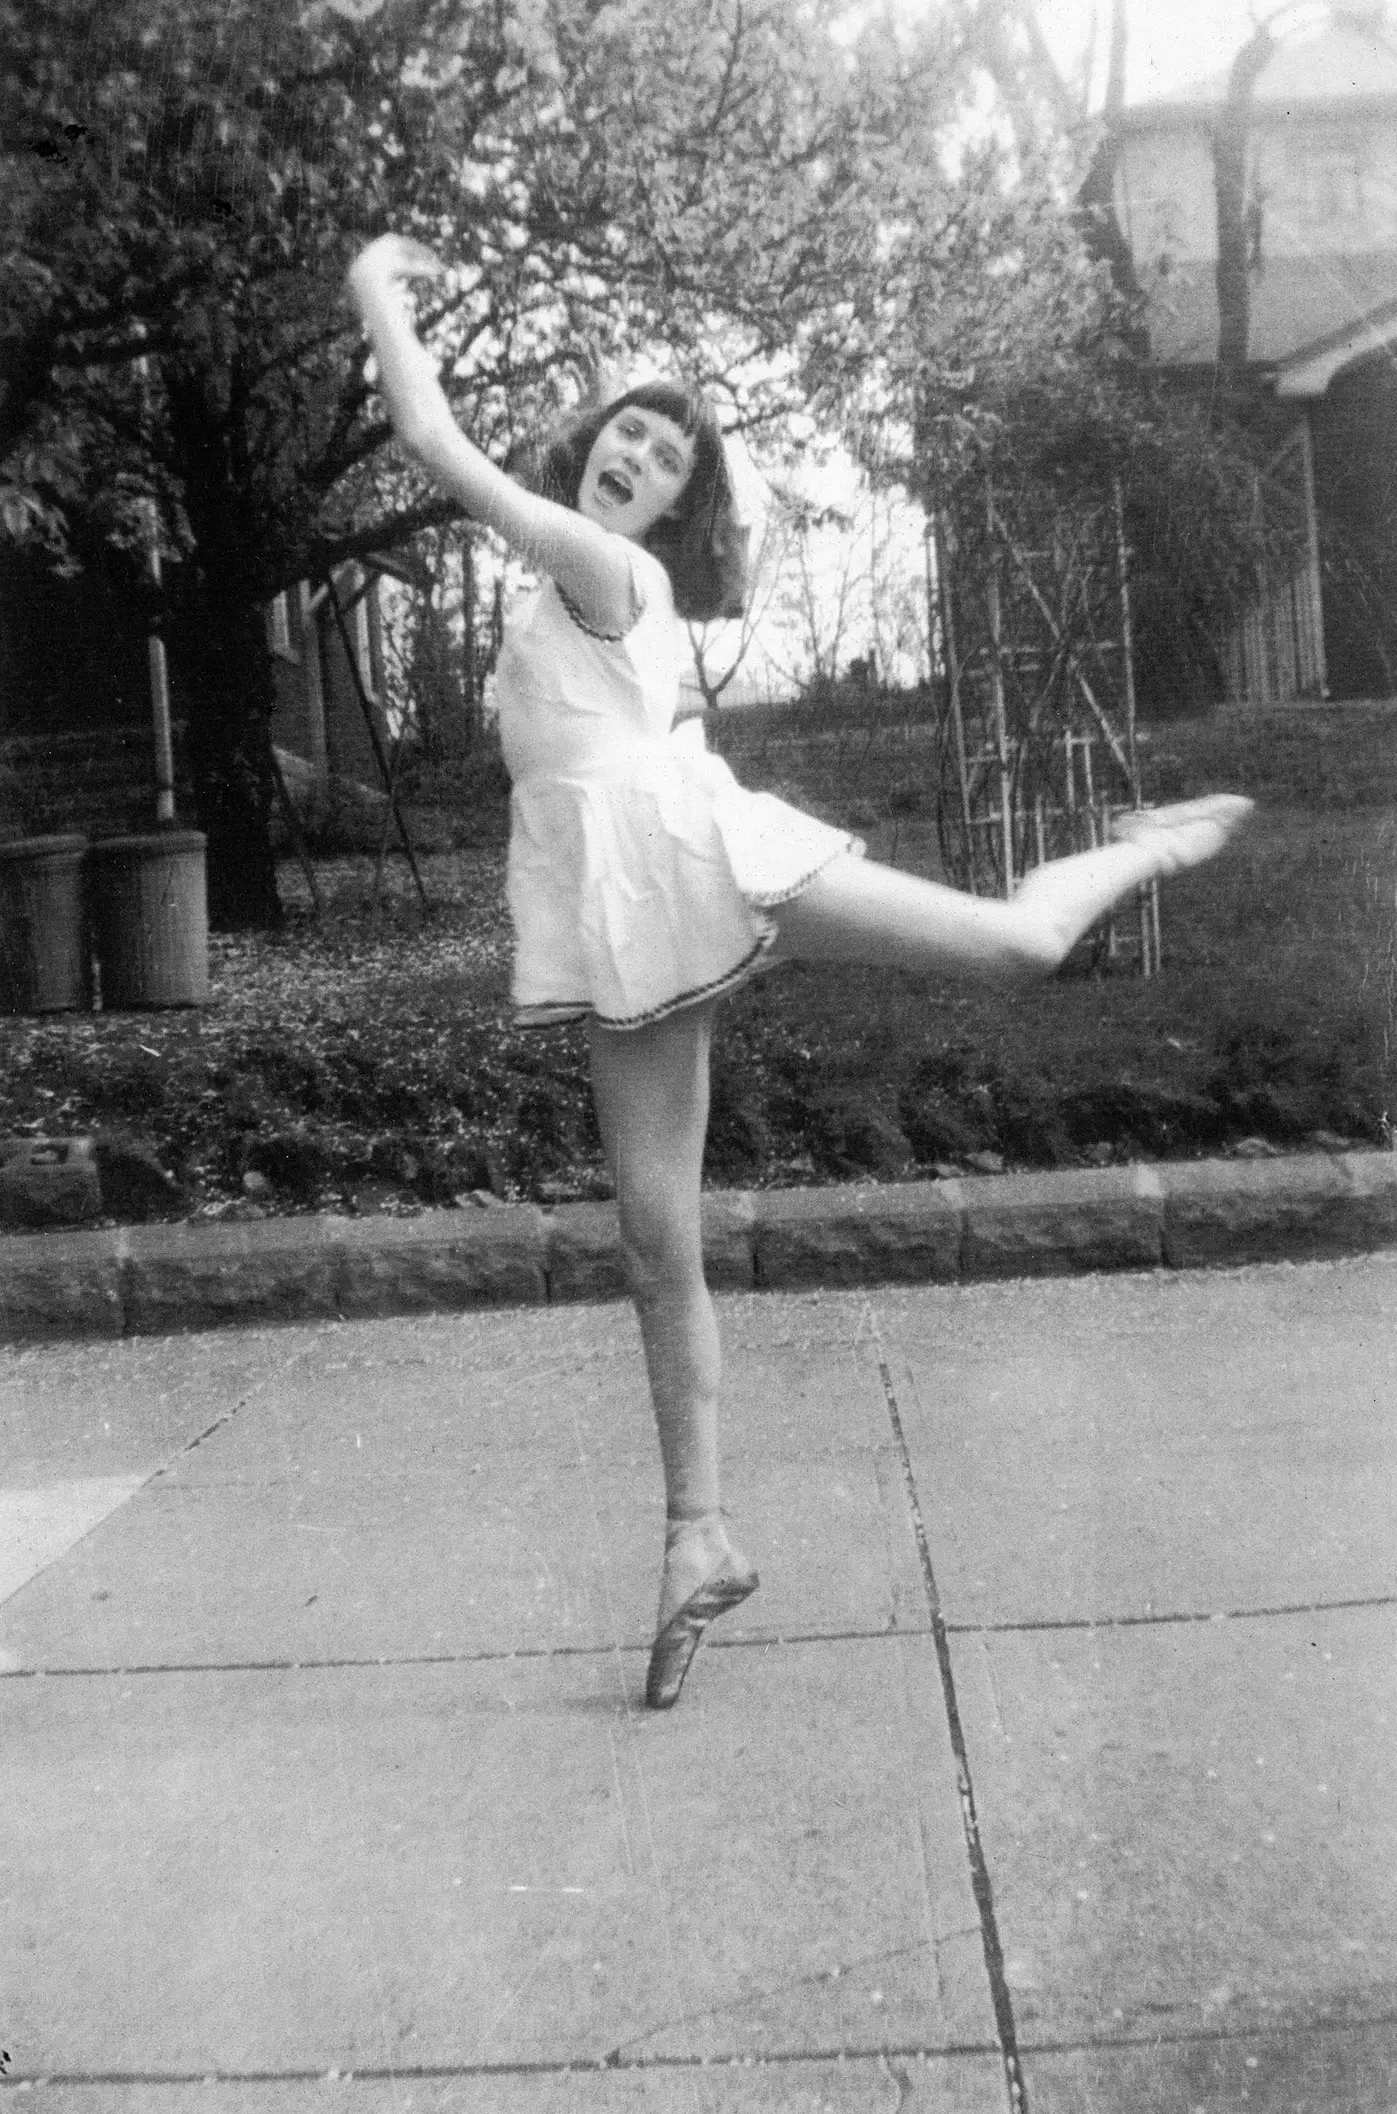 A backyard ballerina…well, almost en point in our driveway. Hardly my Swan Lake moment, but the beginning of an obsession with dance that got me through the indignities of adolescence.